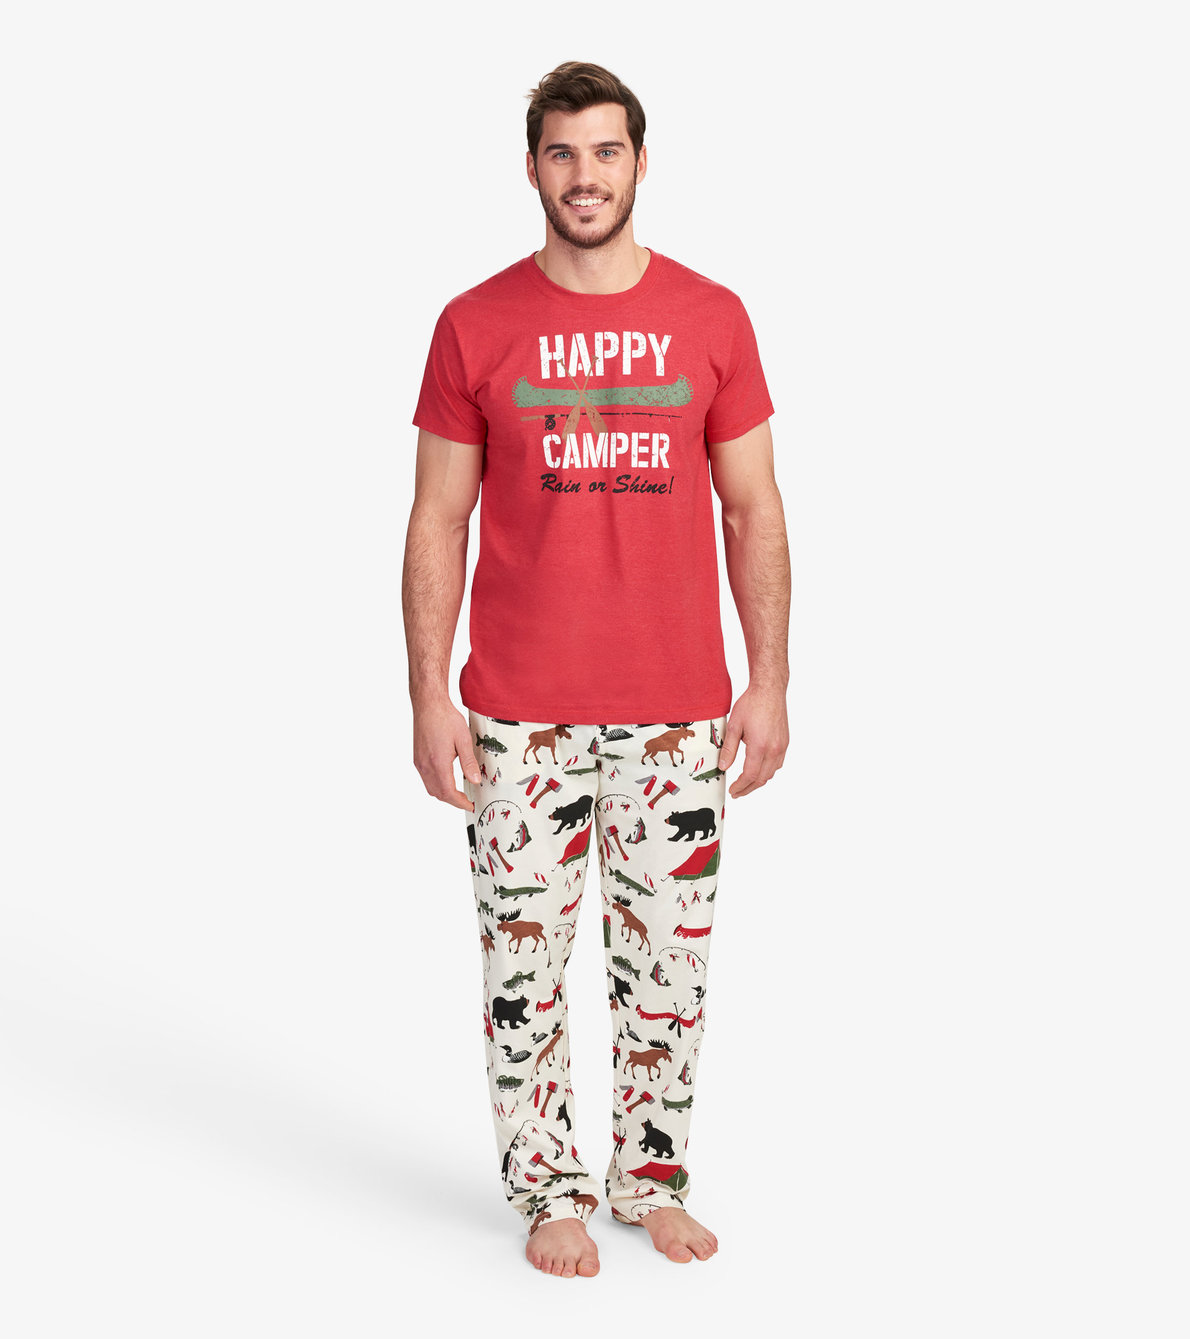 View larger image of Happy Camper Men's Tee and Pants Pajama Separates